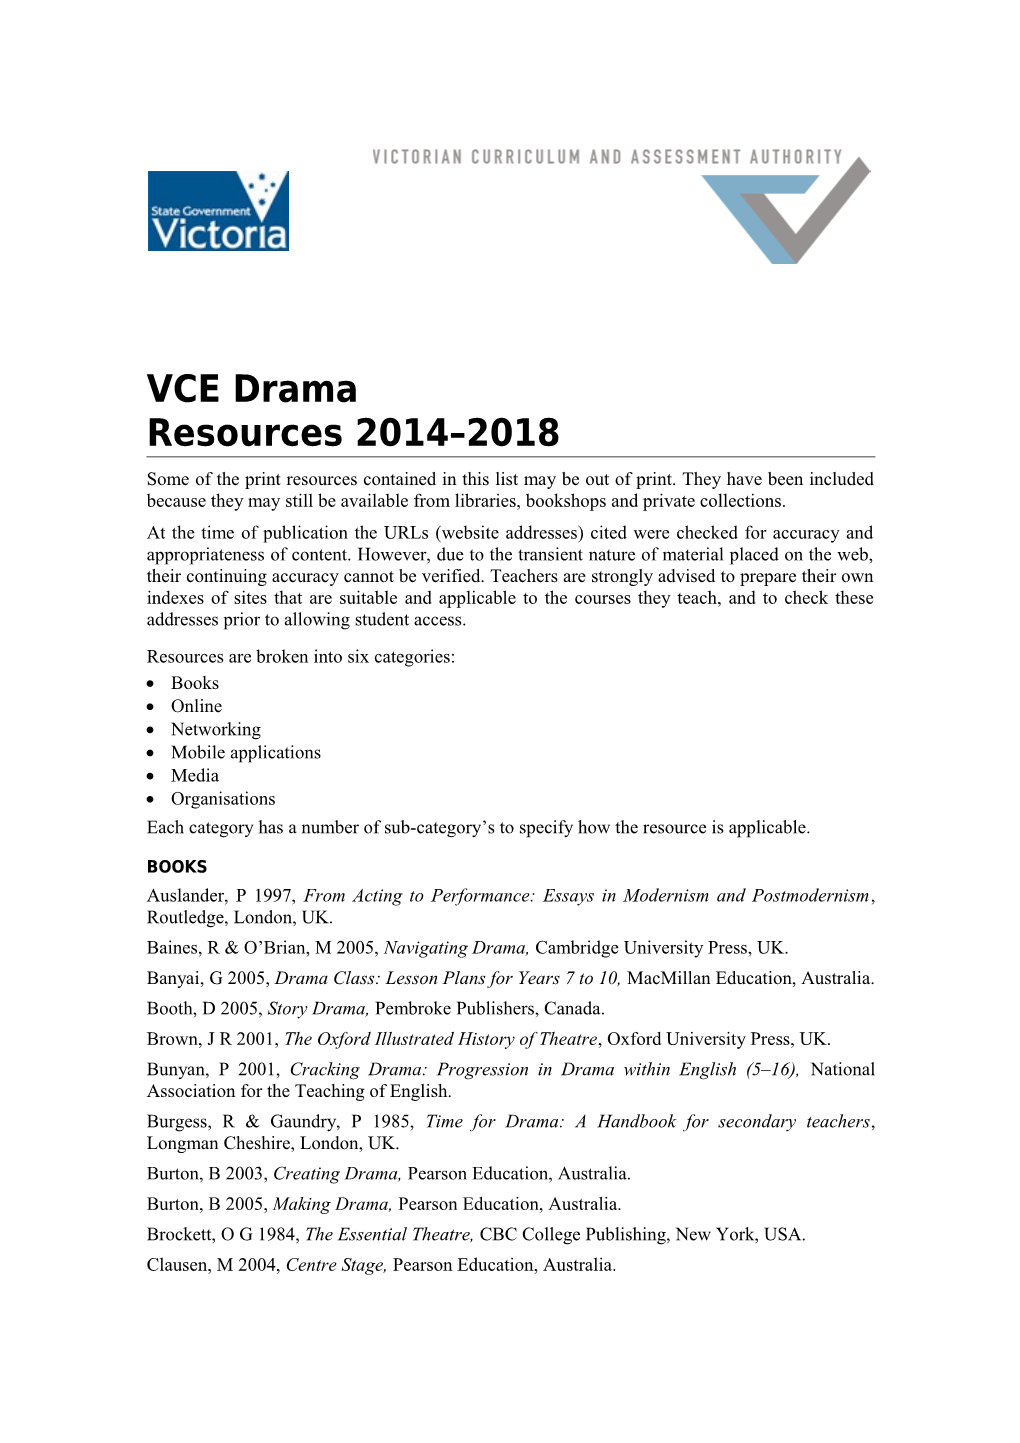 RESOURCES VCE Drama 2014 2018